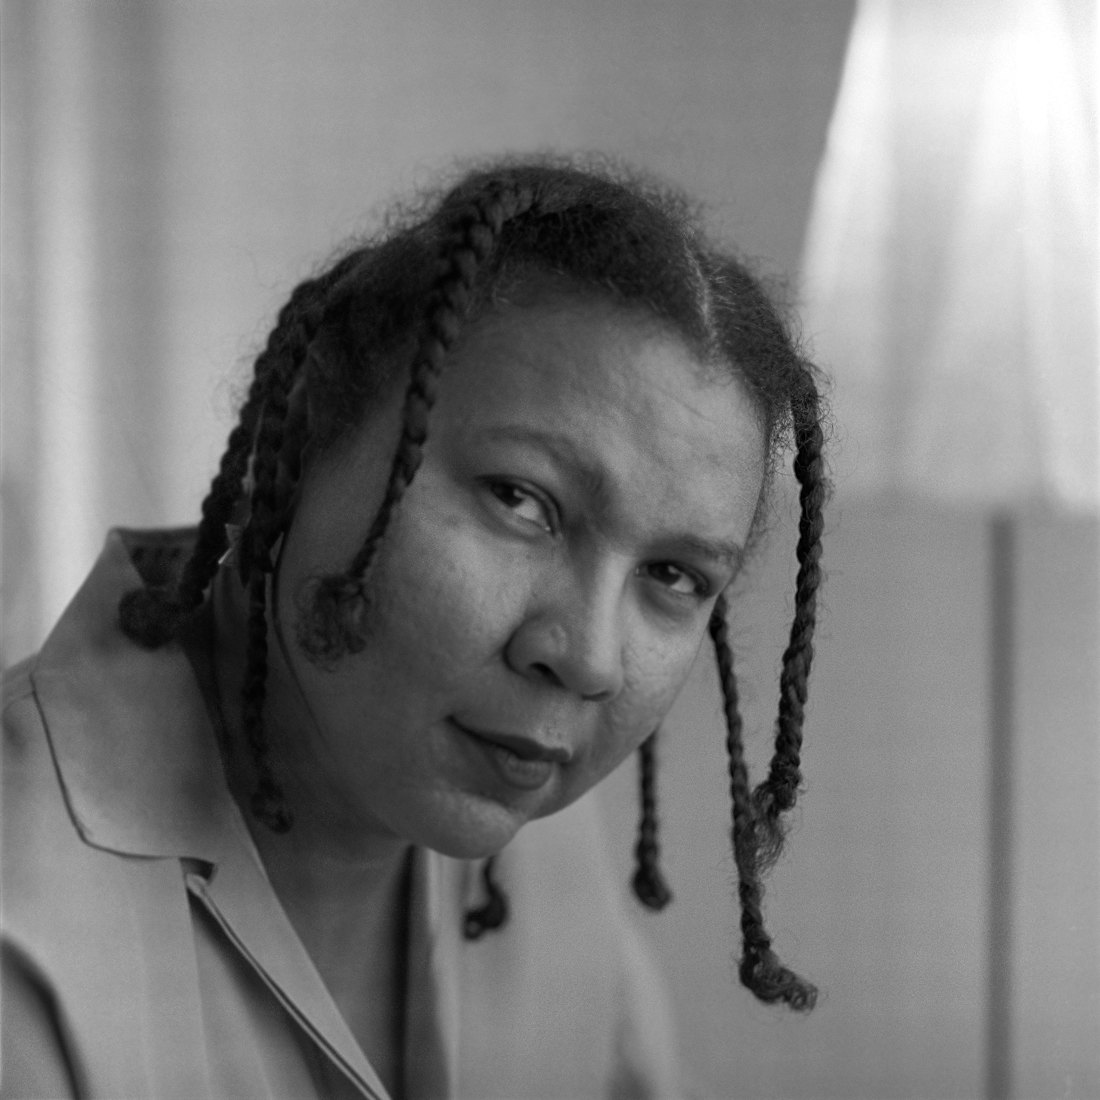 In honor of bell hooks' death, we rounded up a list of bell hooks quotes.